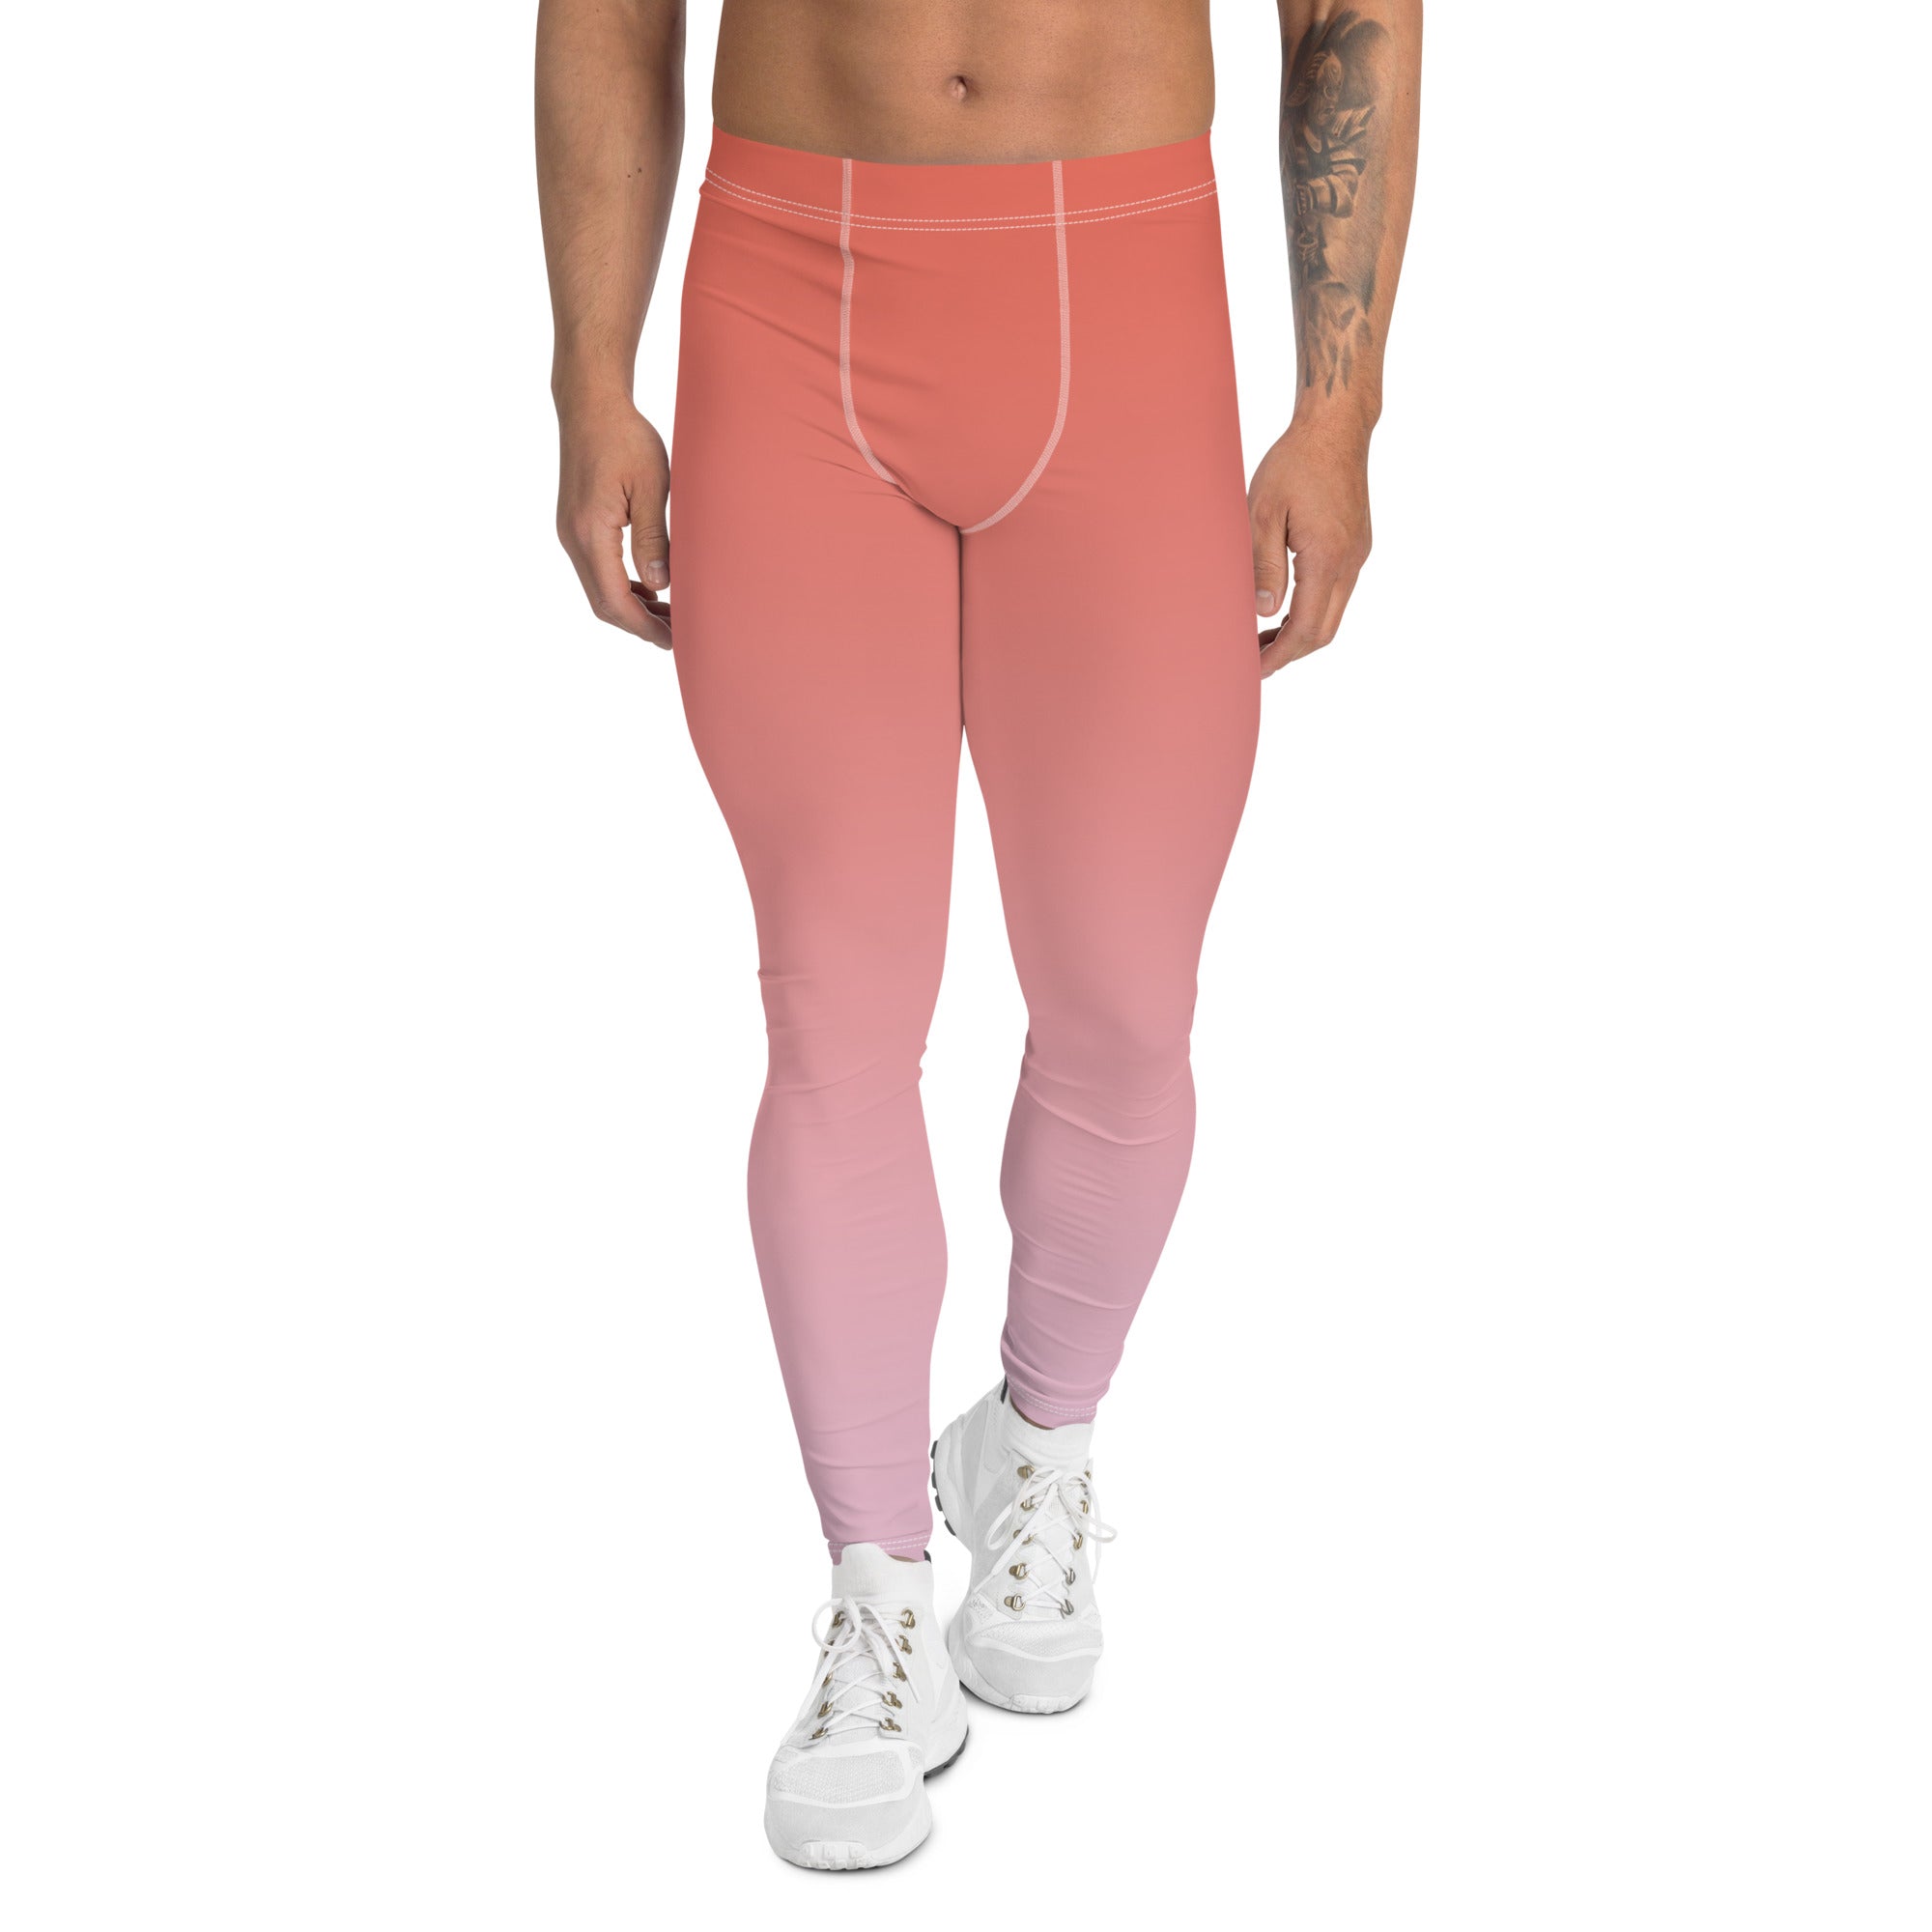 Rose and Pink Ombre Men's Leggings